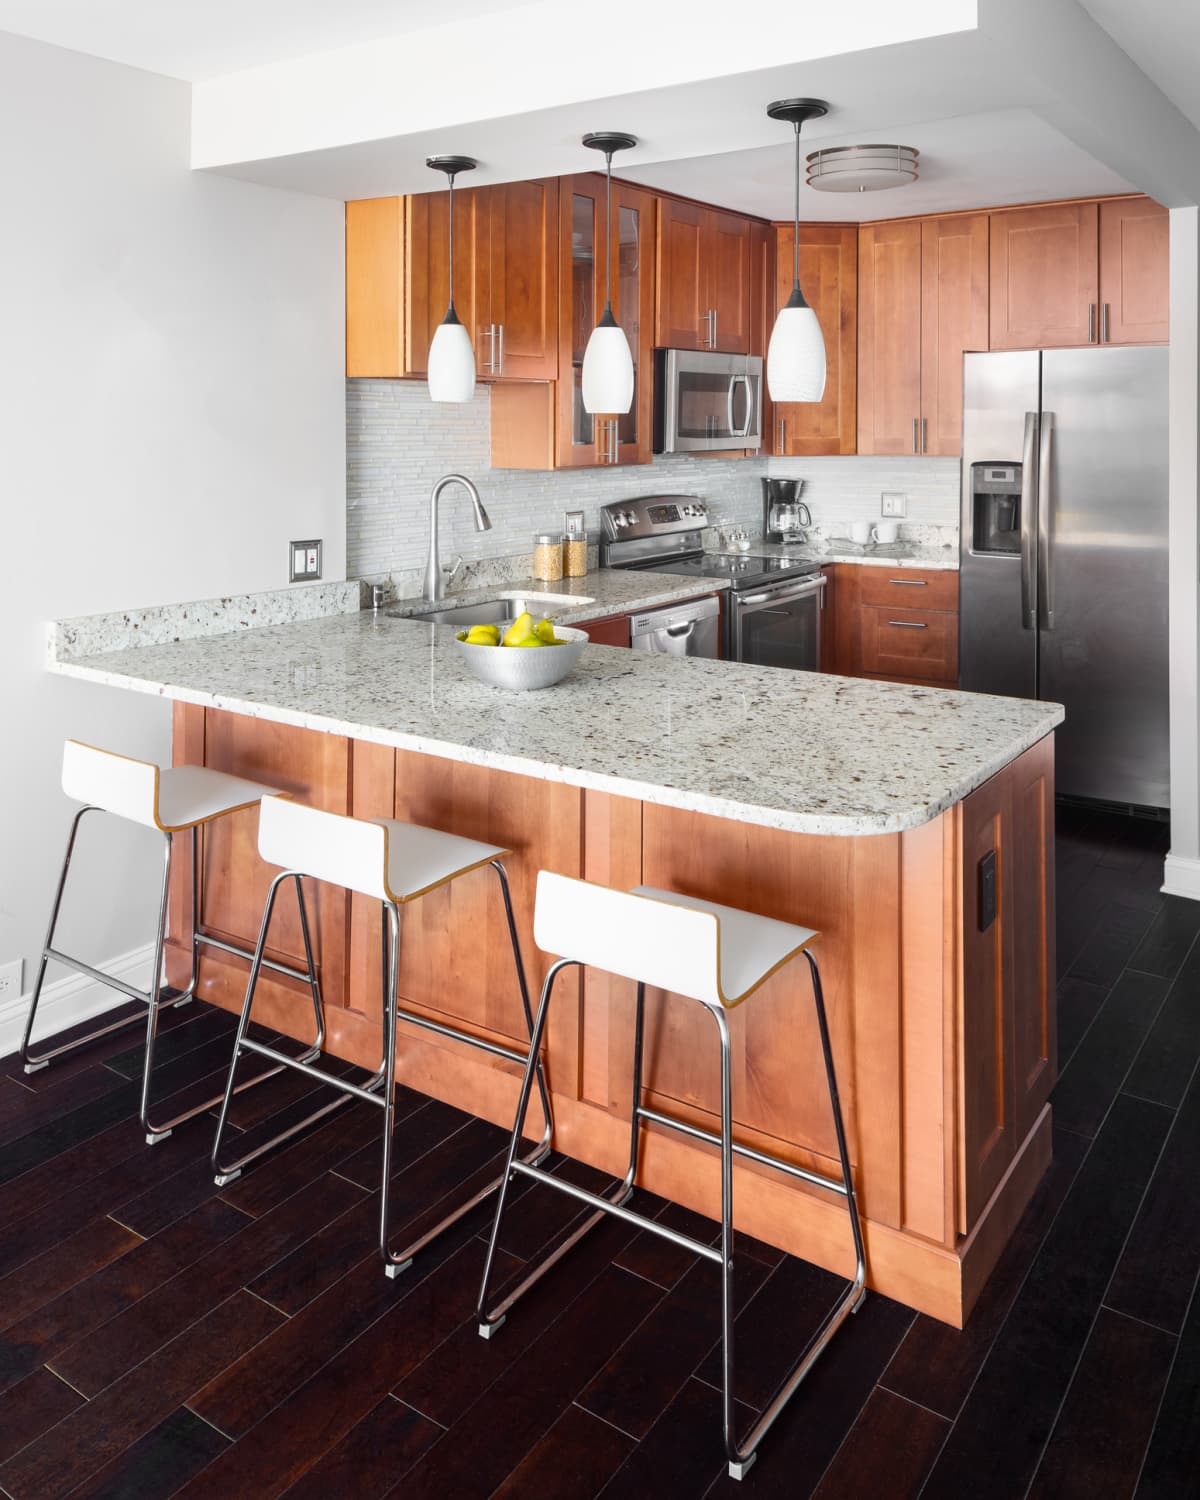 An apartment kitchen with wood cabinets, stainless steel appliances, and pendant lights hanging above the granite countertops.